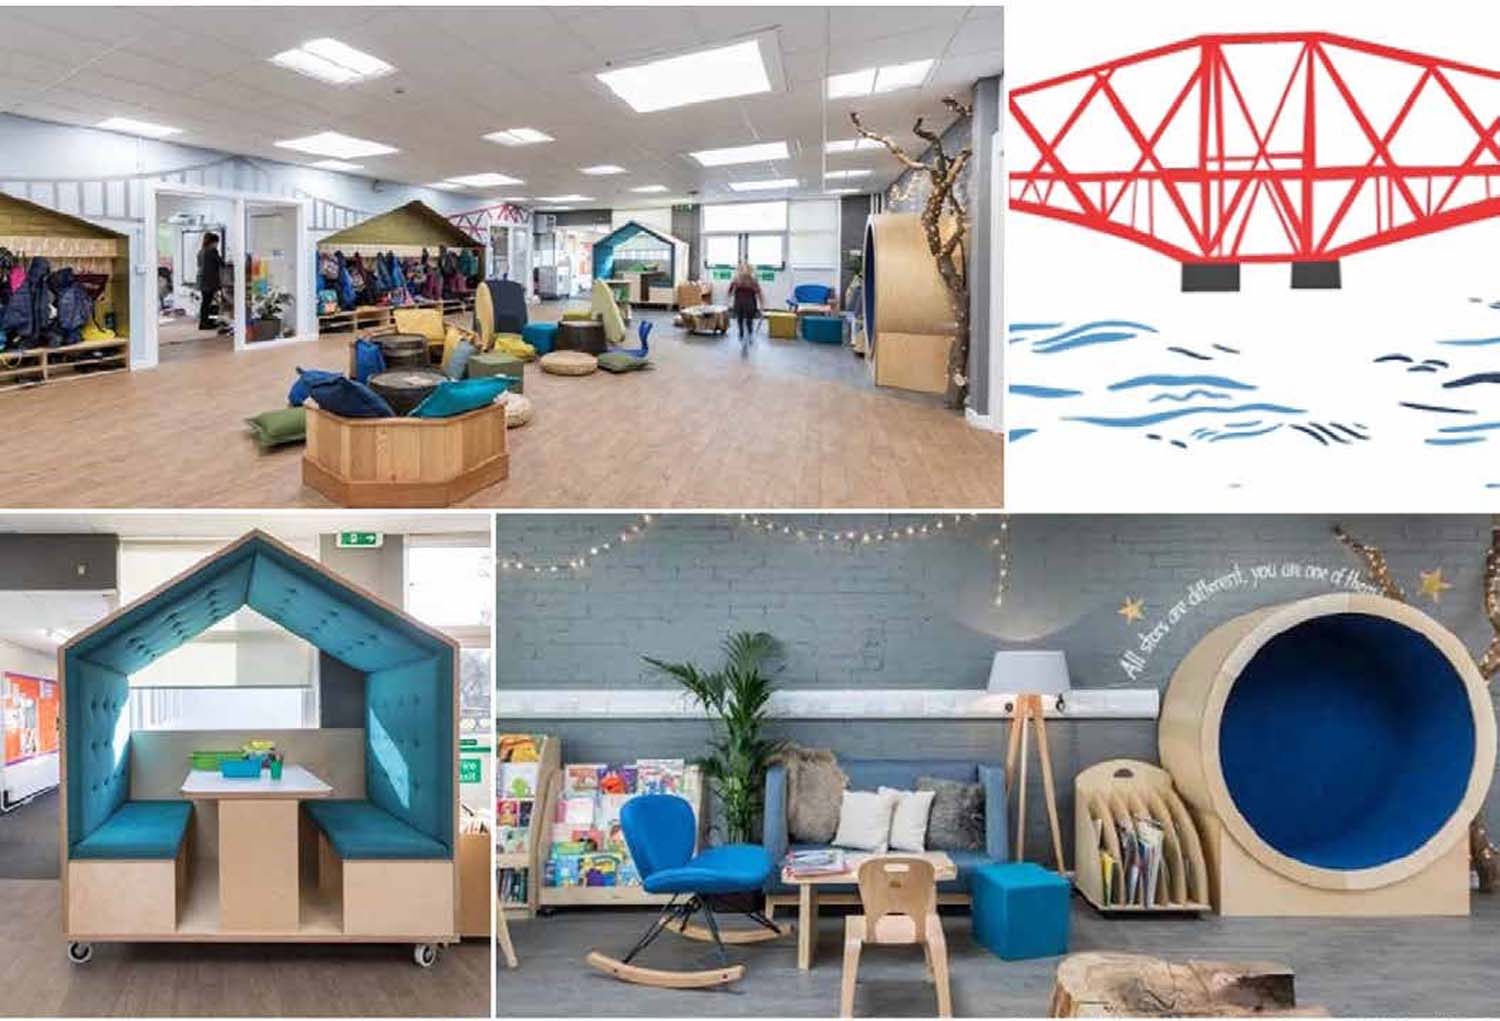 A composite image of a school's interior spaces and furniture. There are comfortable chairs, armchairs and bean bags. There are custom made furniture such as moveable booths and coat storage spaces in teal and green hues.